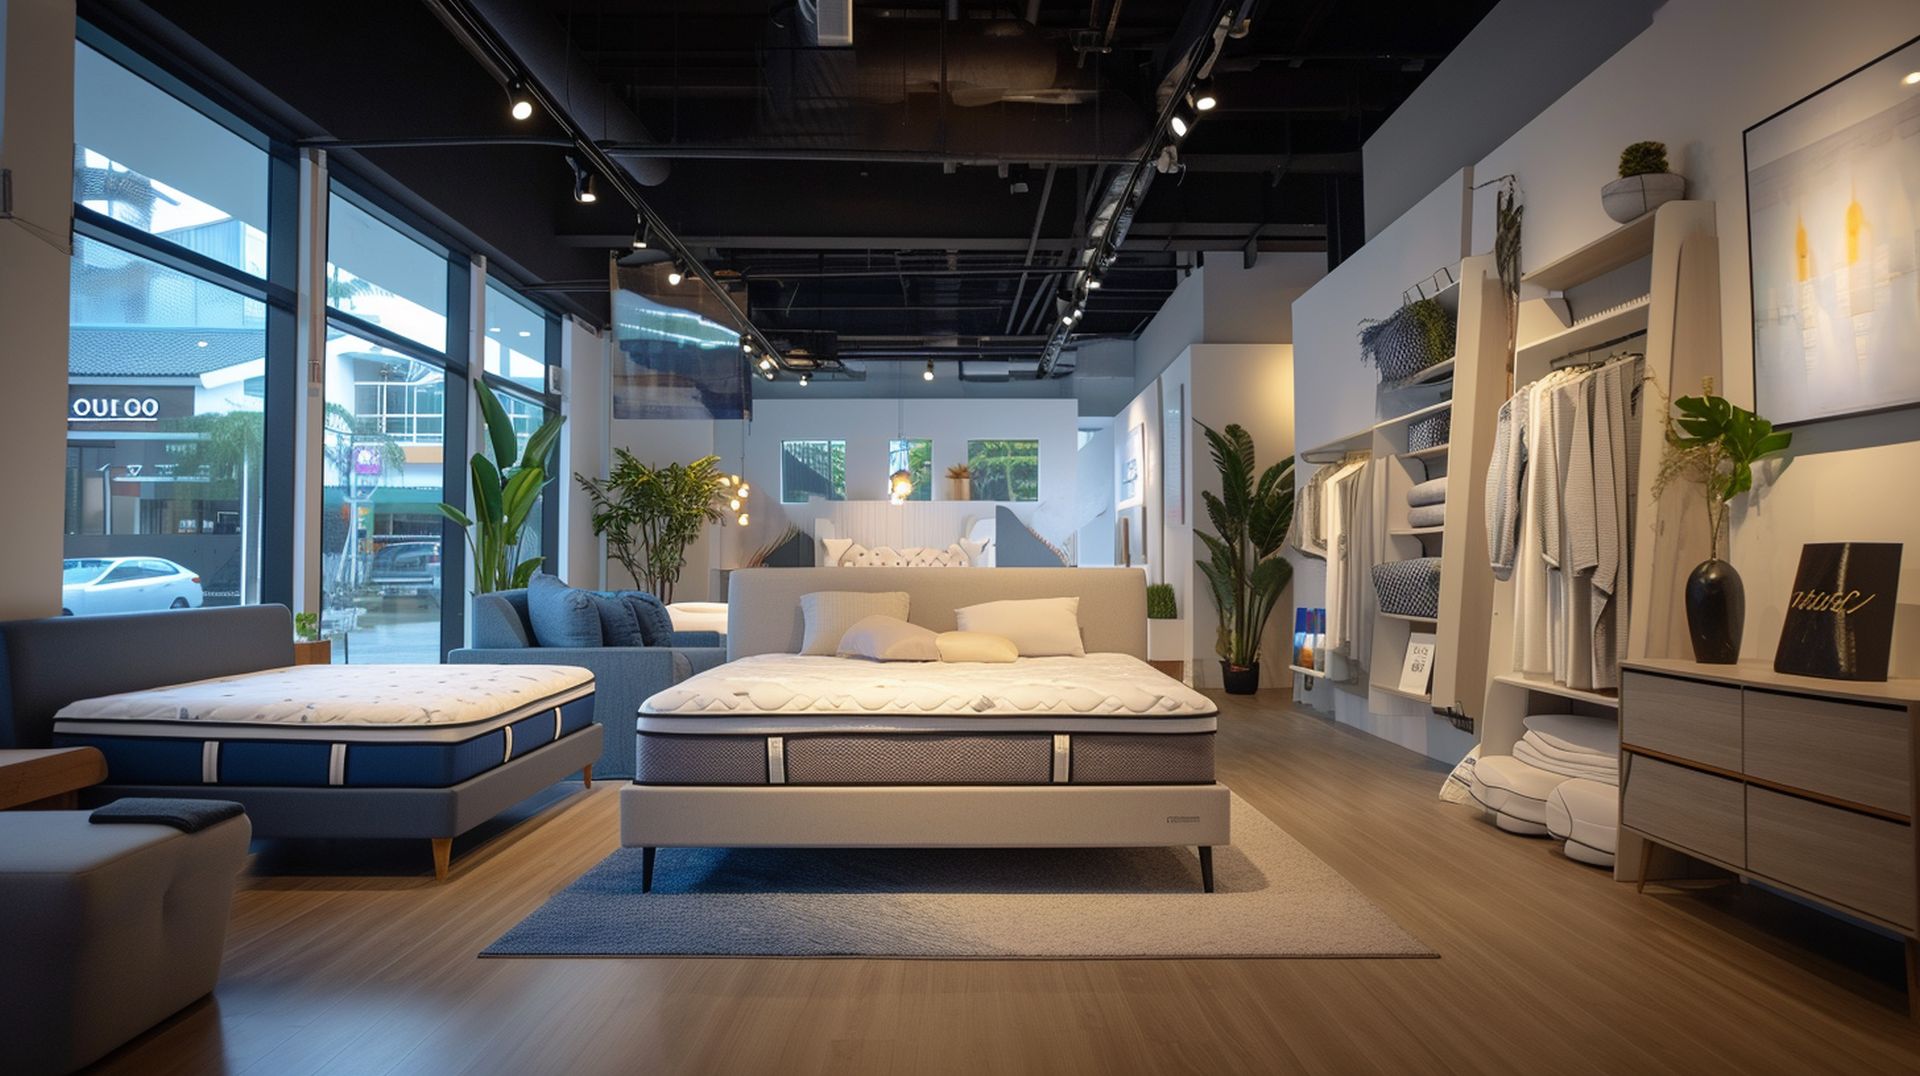 If you're looking for a new bed, mattress stores in Murrieta offer the best customer and delivery service, financing, and warranties in California